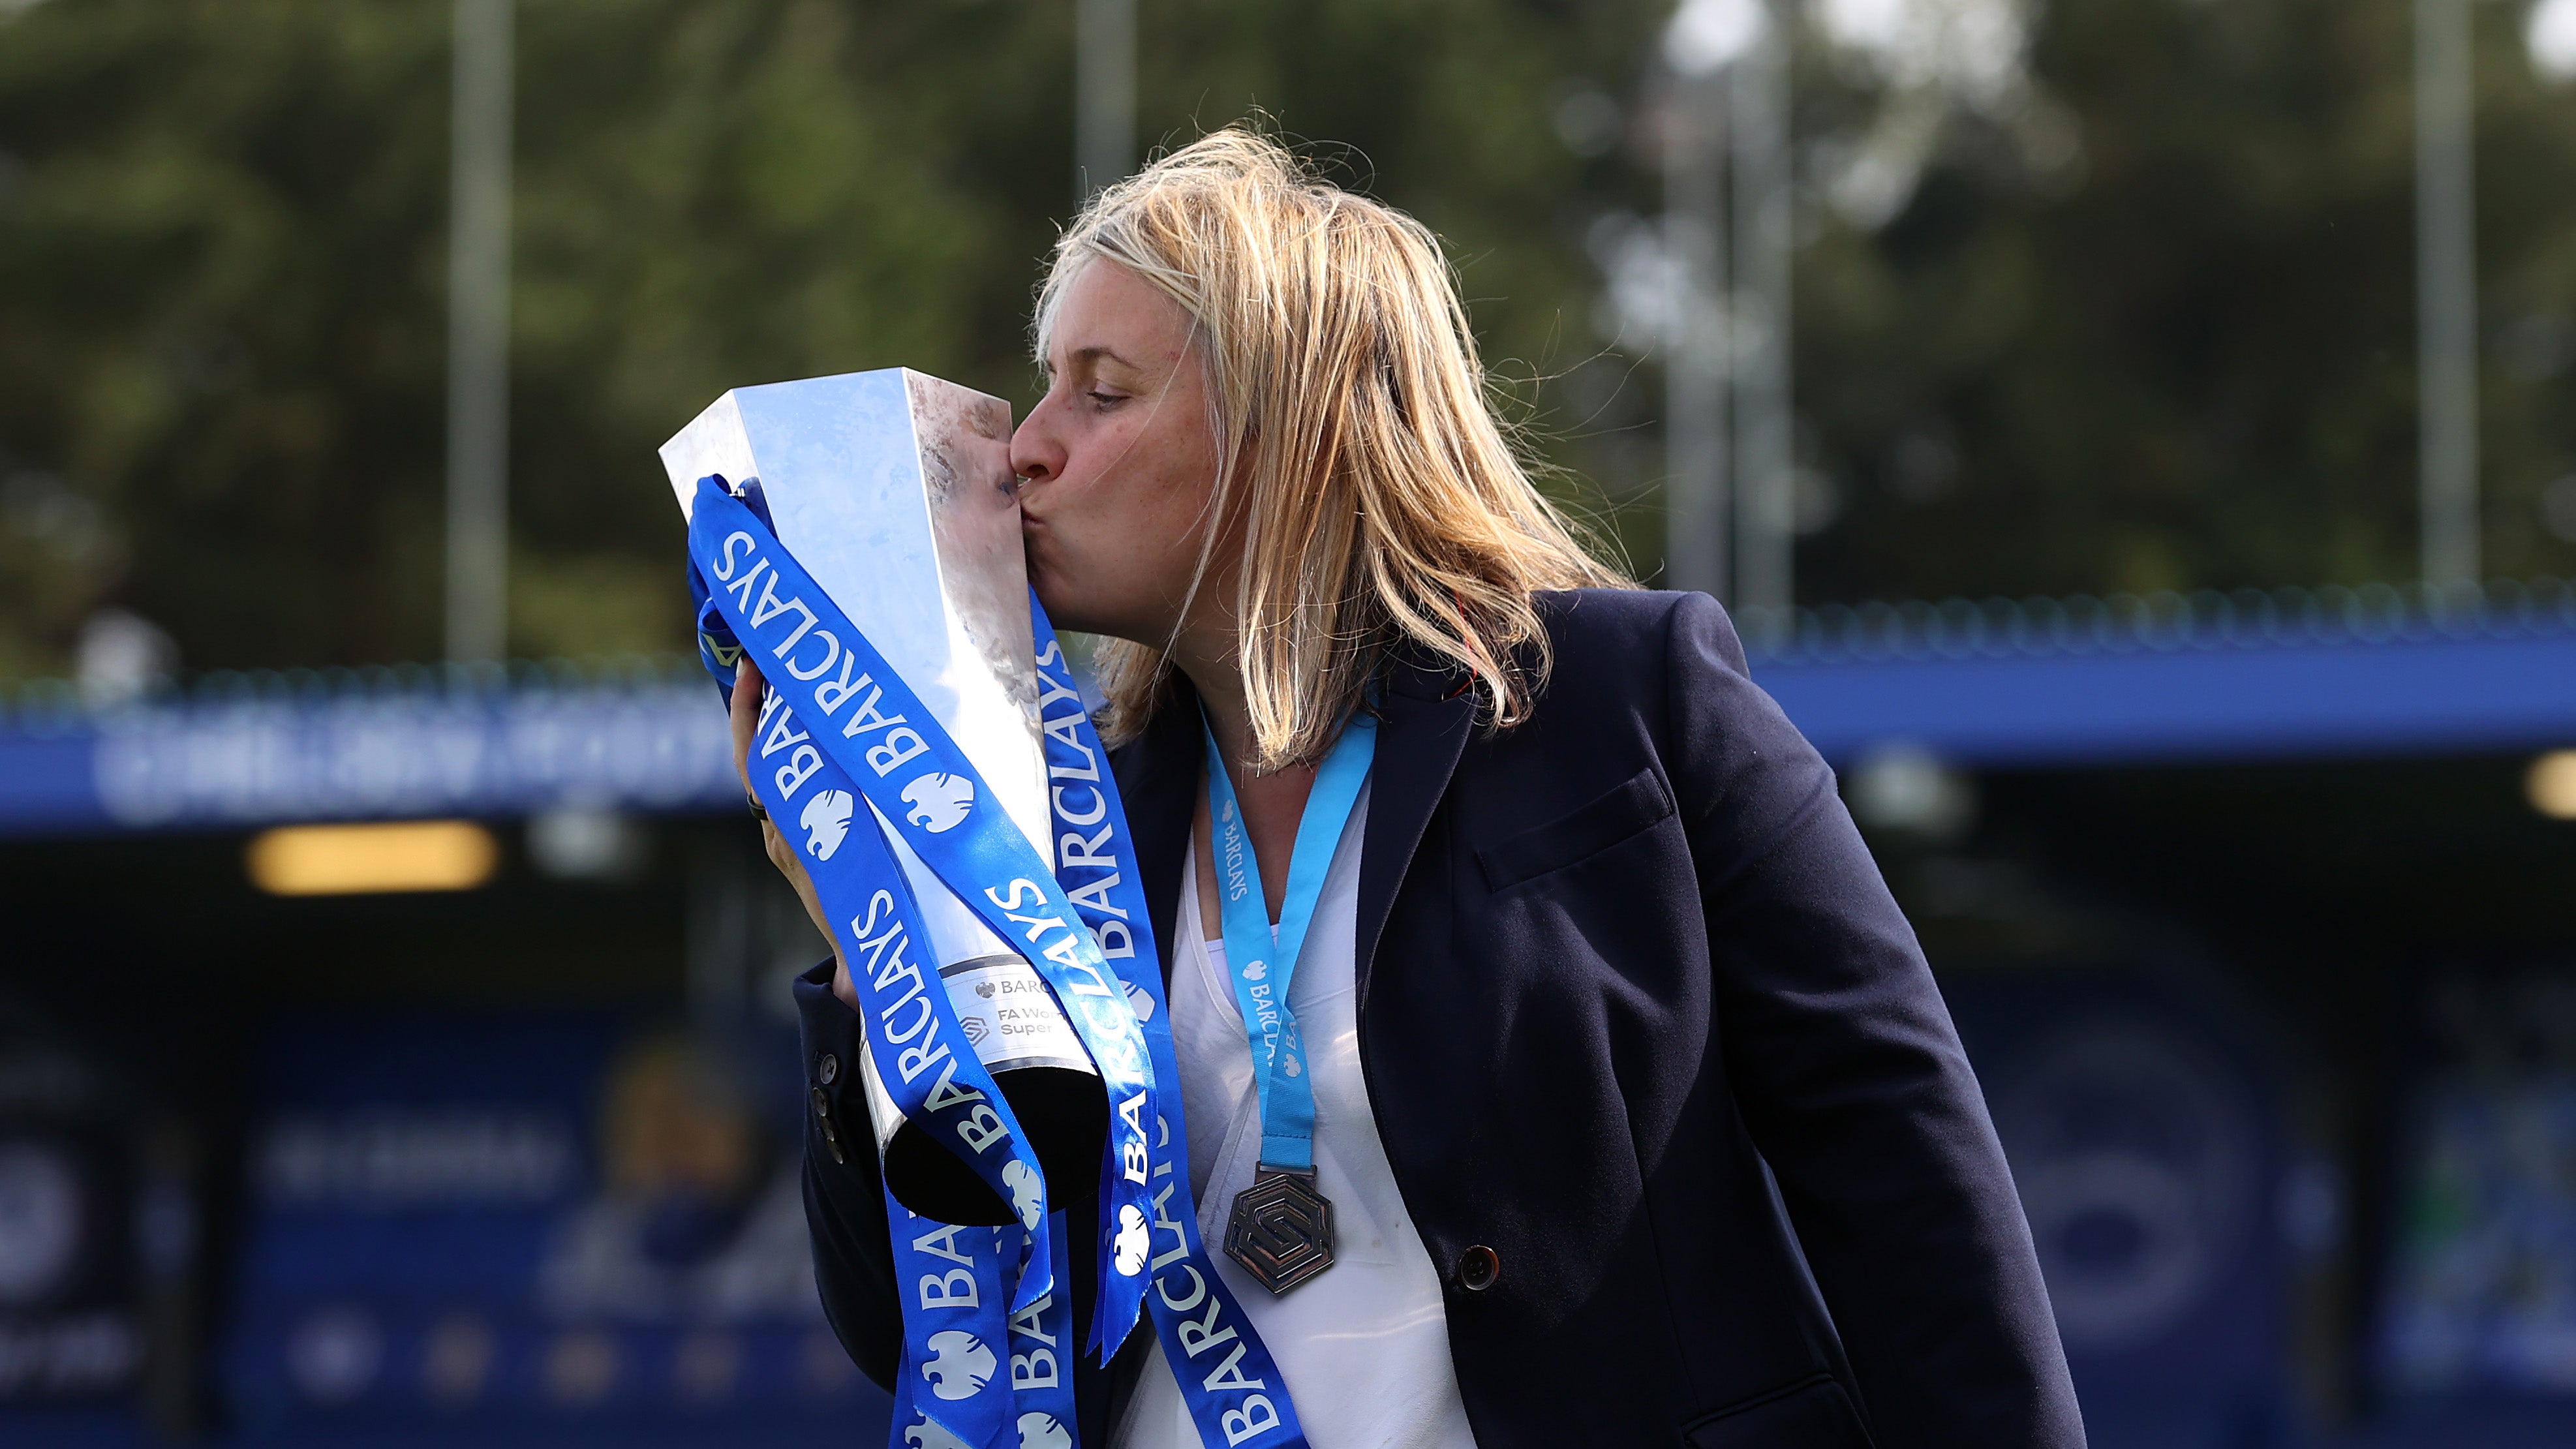 Emma Hayes won her fourth WSL title in six seasons as Chelsea boss